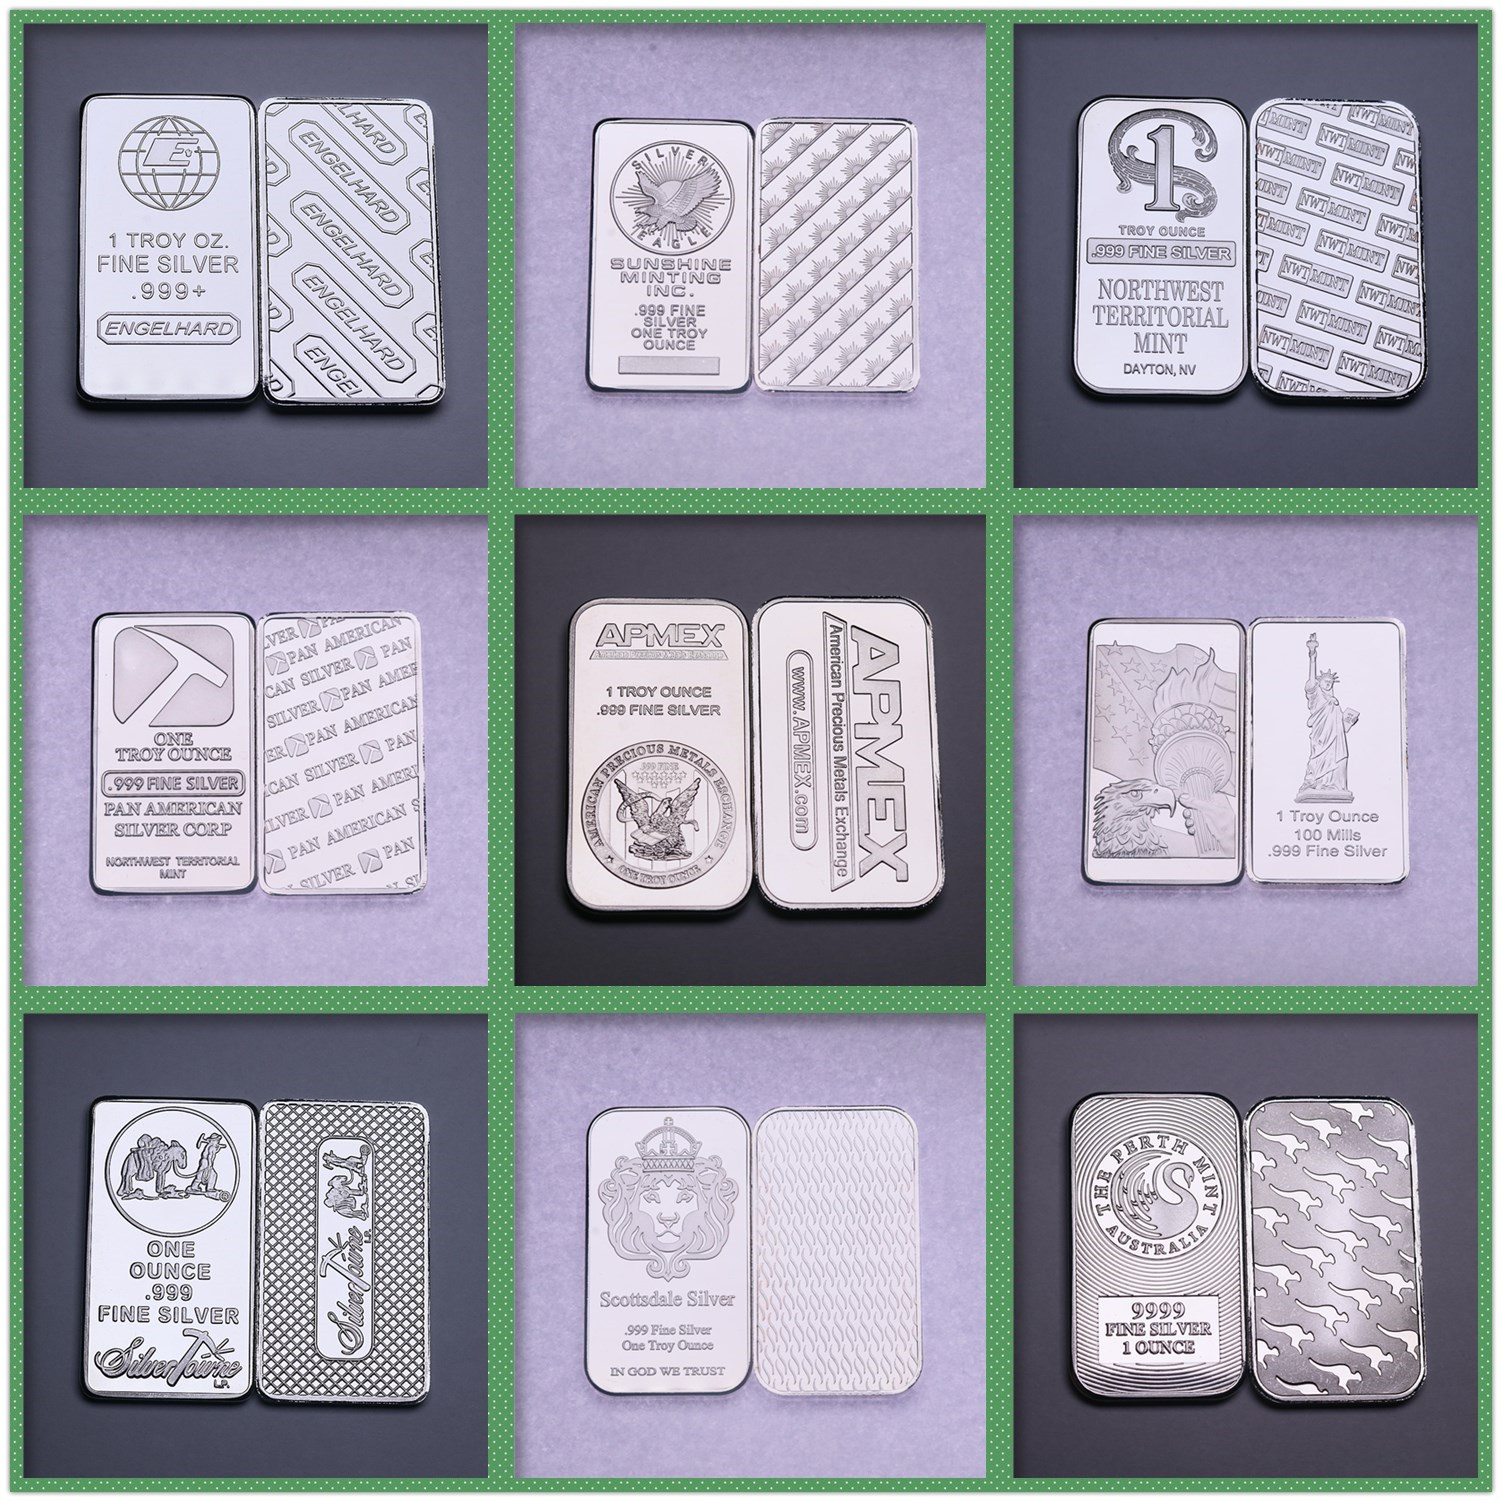 

Other Arts and Crafts 1 Oz Silver Bar Series Bullion Bar Gather Stagecoach silvercolored Divisible Apmex Johnson Matthey Sunshine Towne Prospector SilverBar